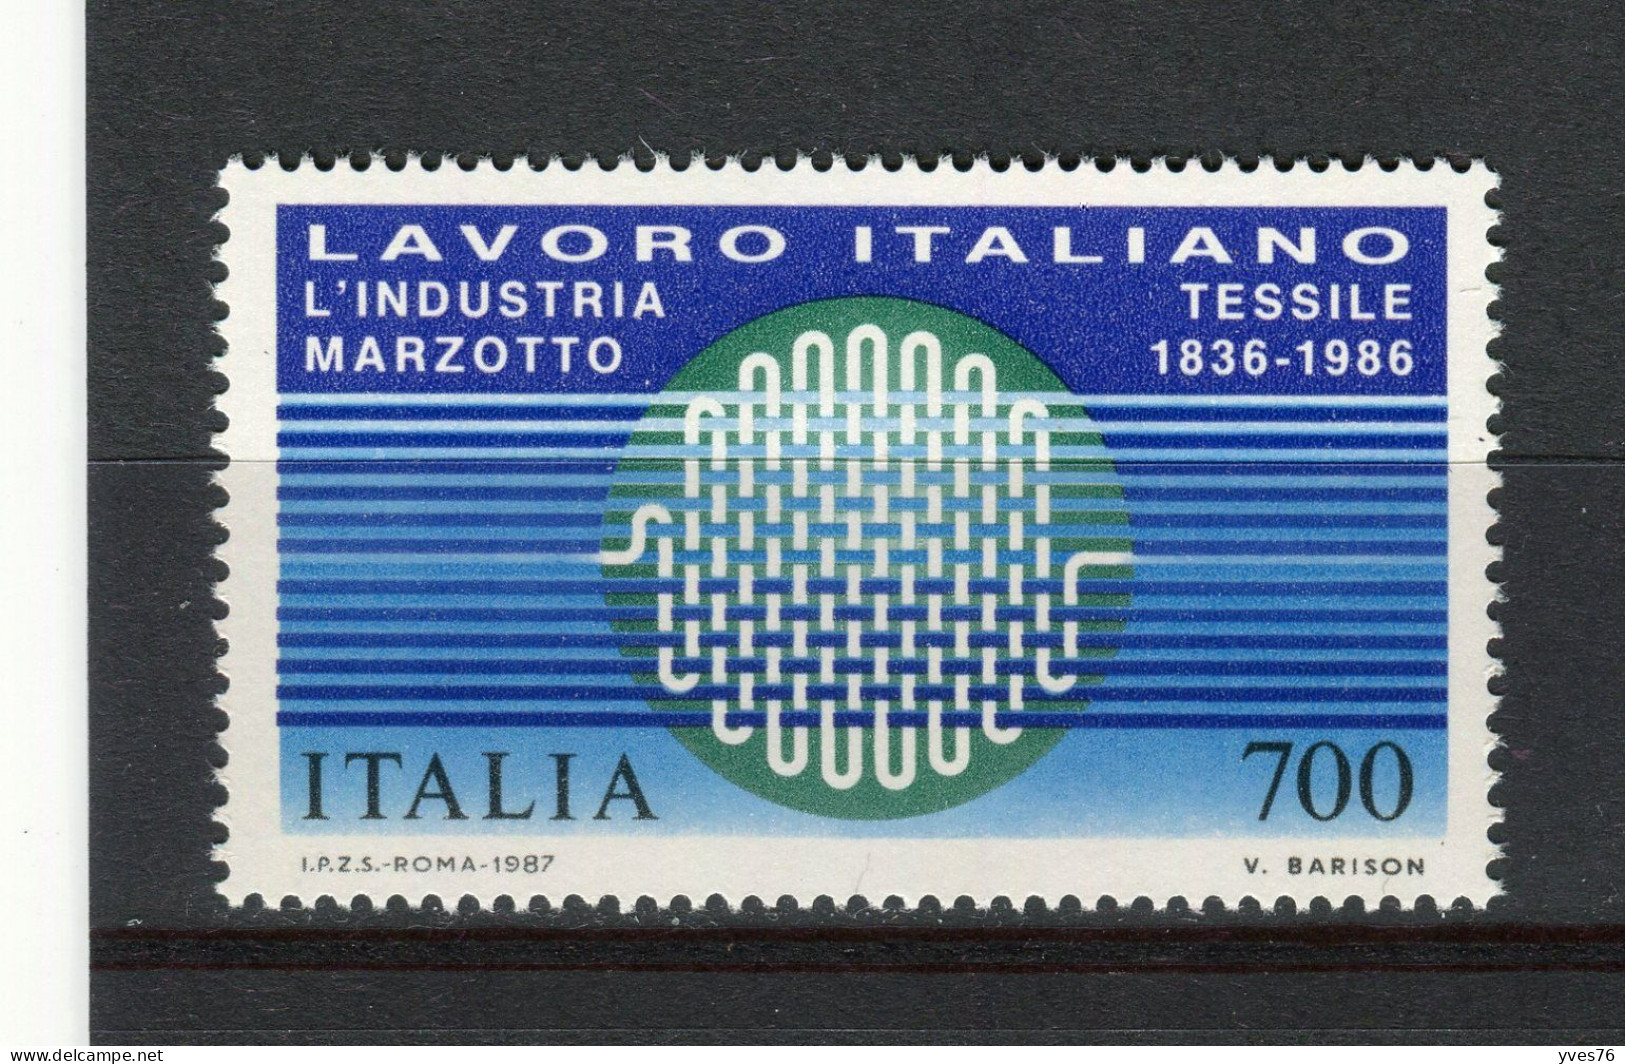 ITALIE - Y&T N° 1735** - MNH - Industrie Textile Marzotto - 1981-90: Mint/hinged